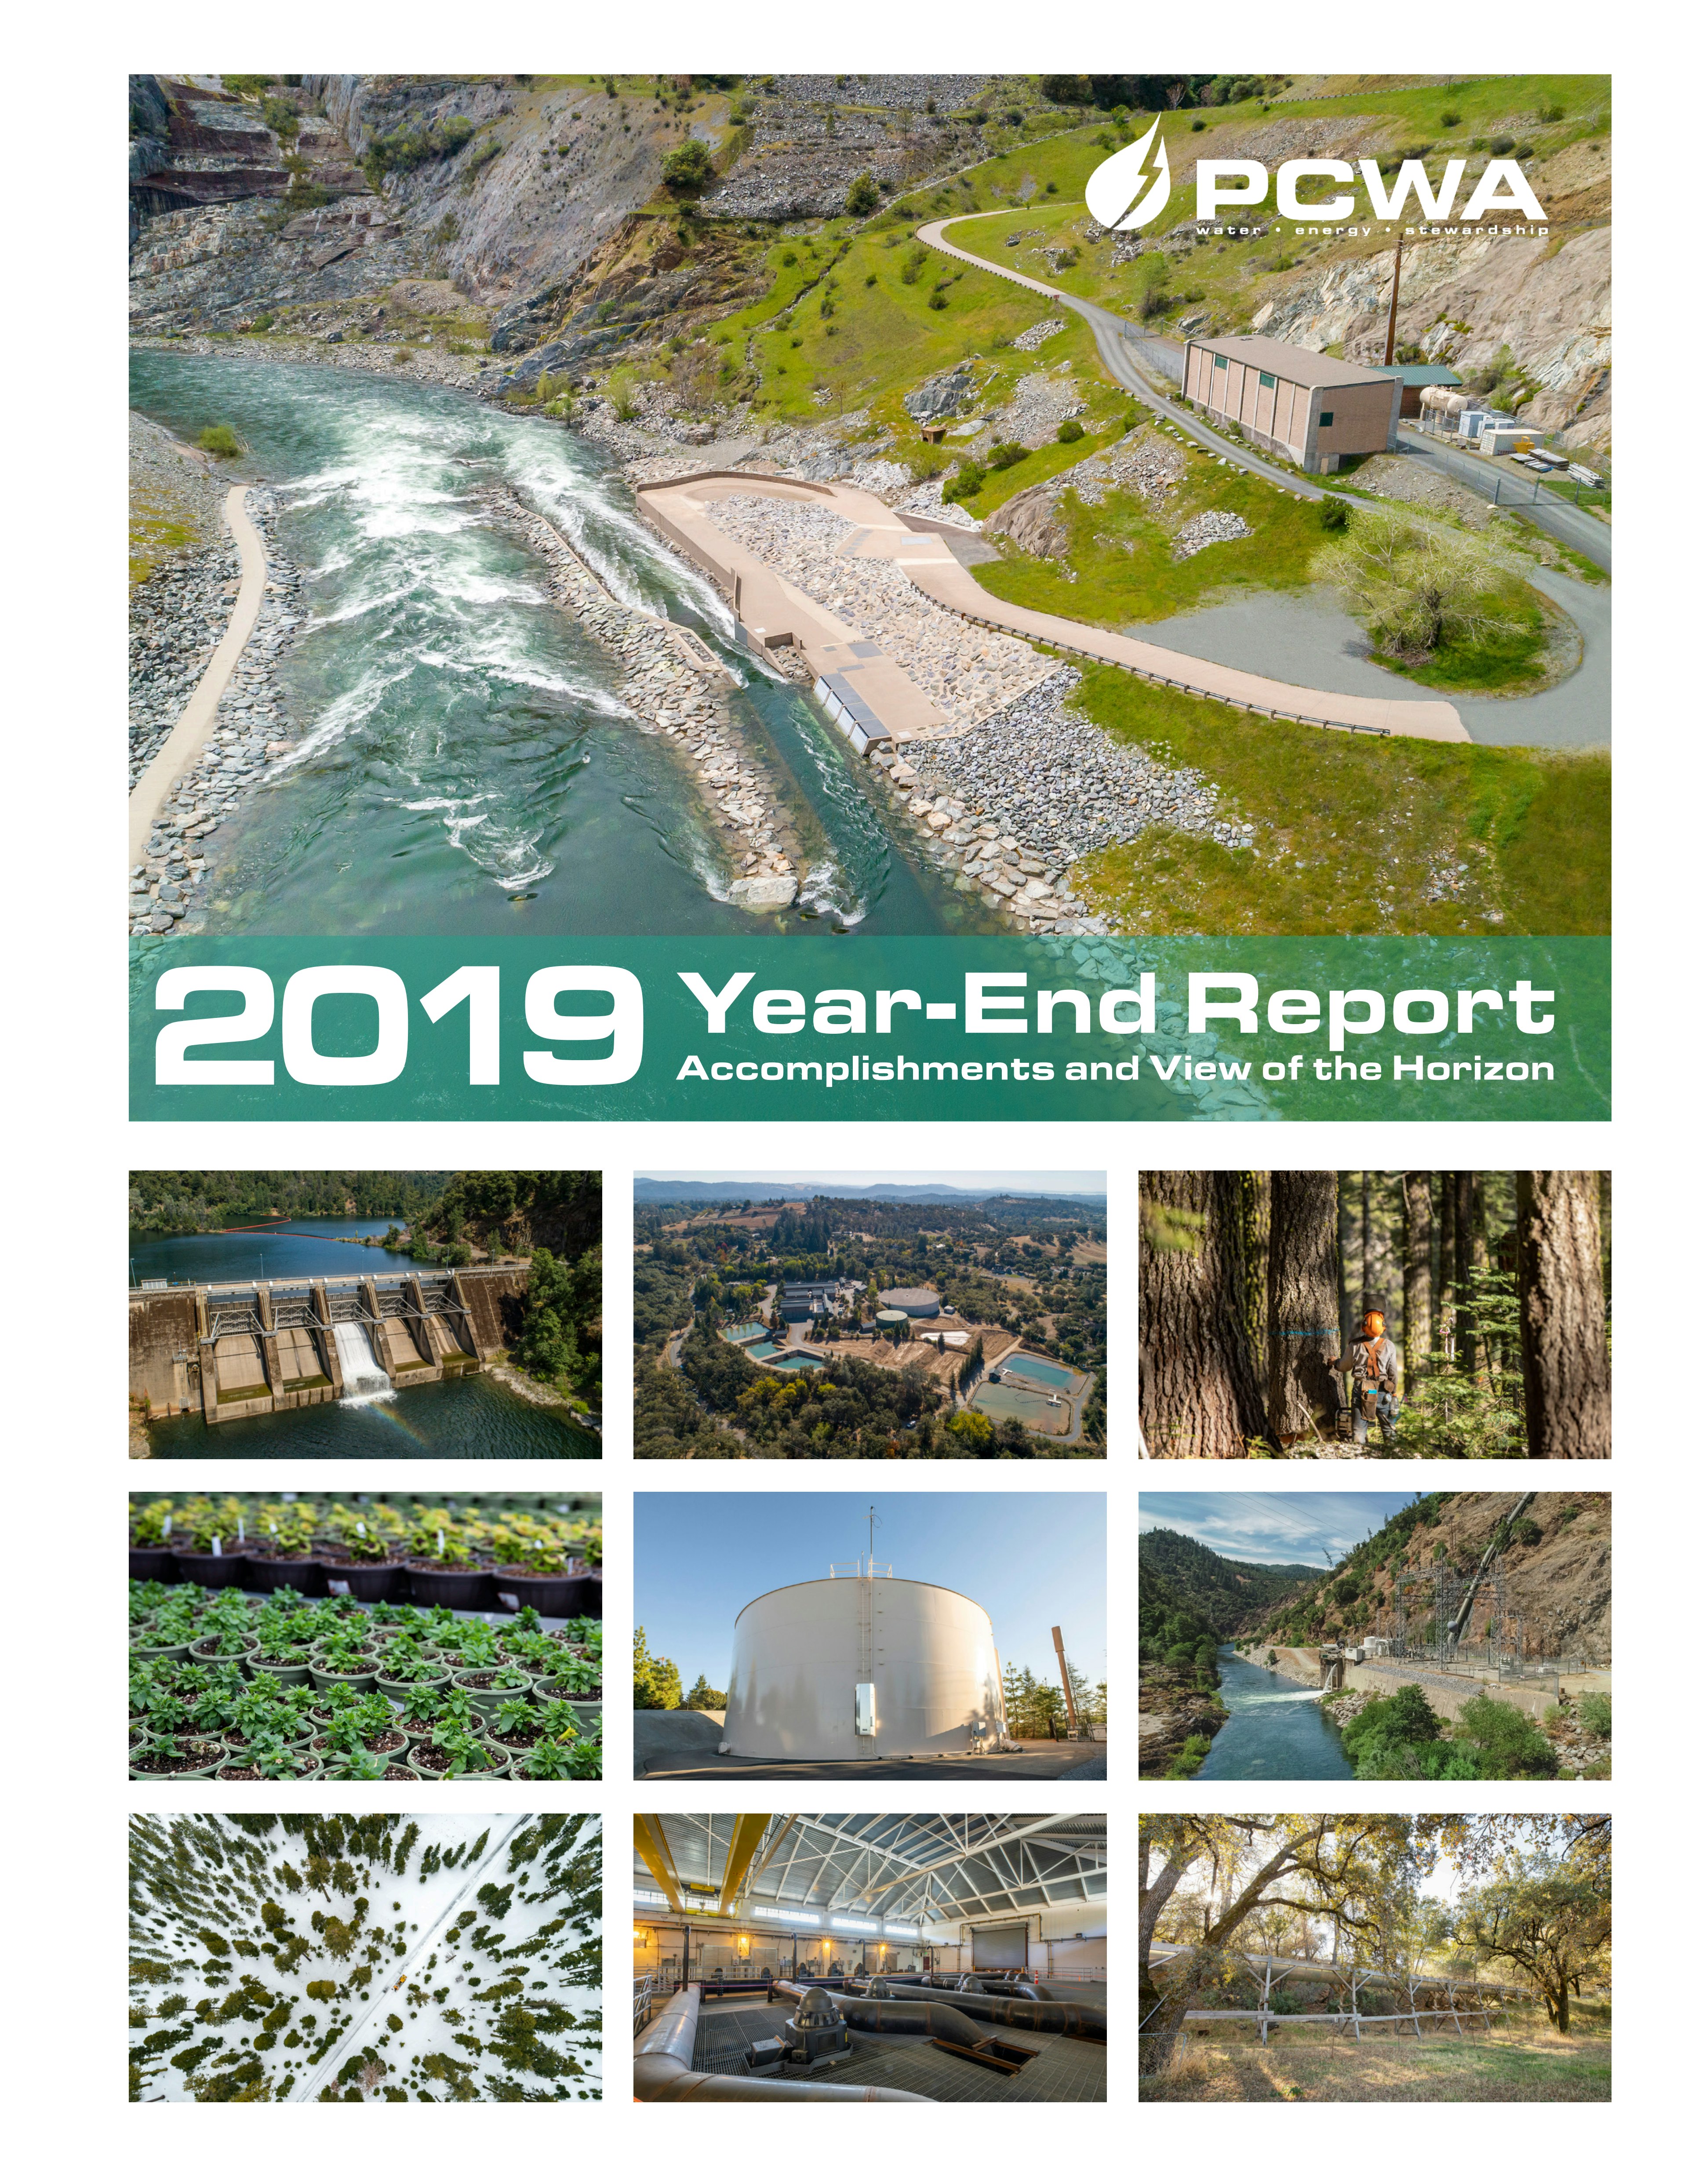 Thumbnail image and link for 2019 Year End Report publication